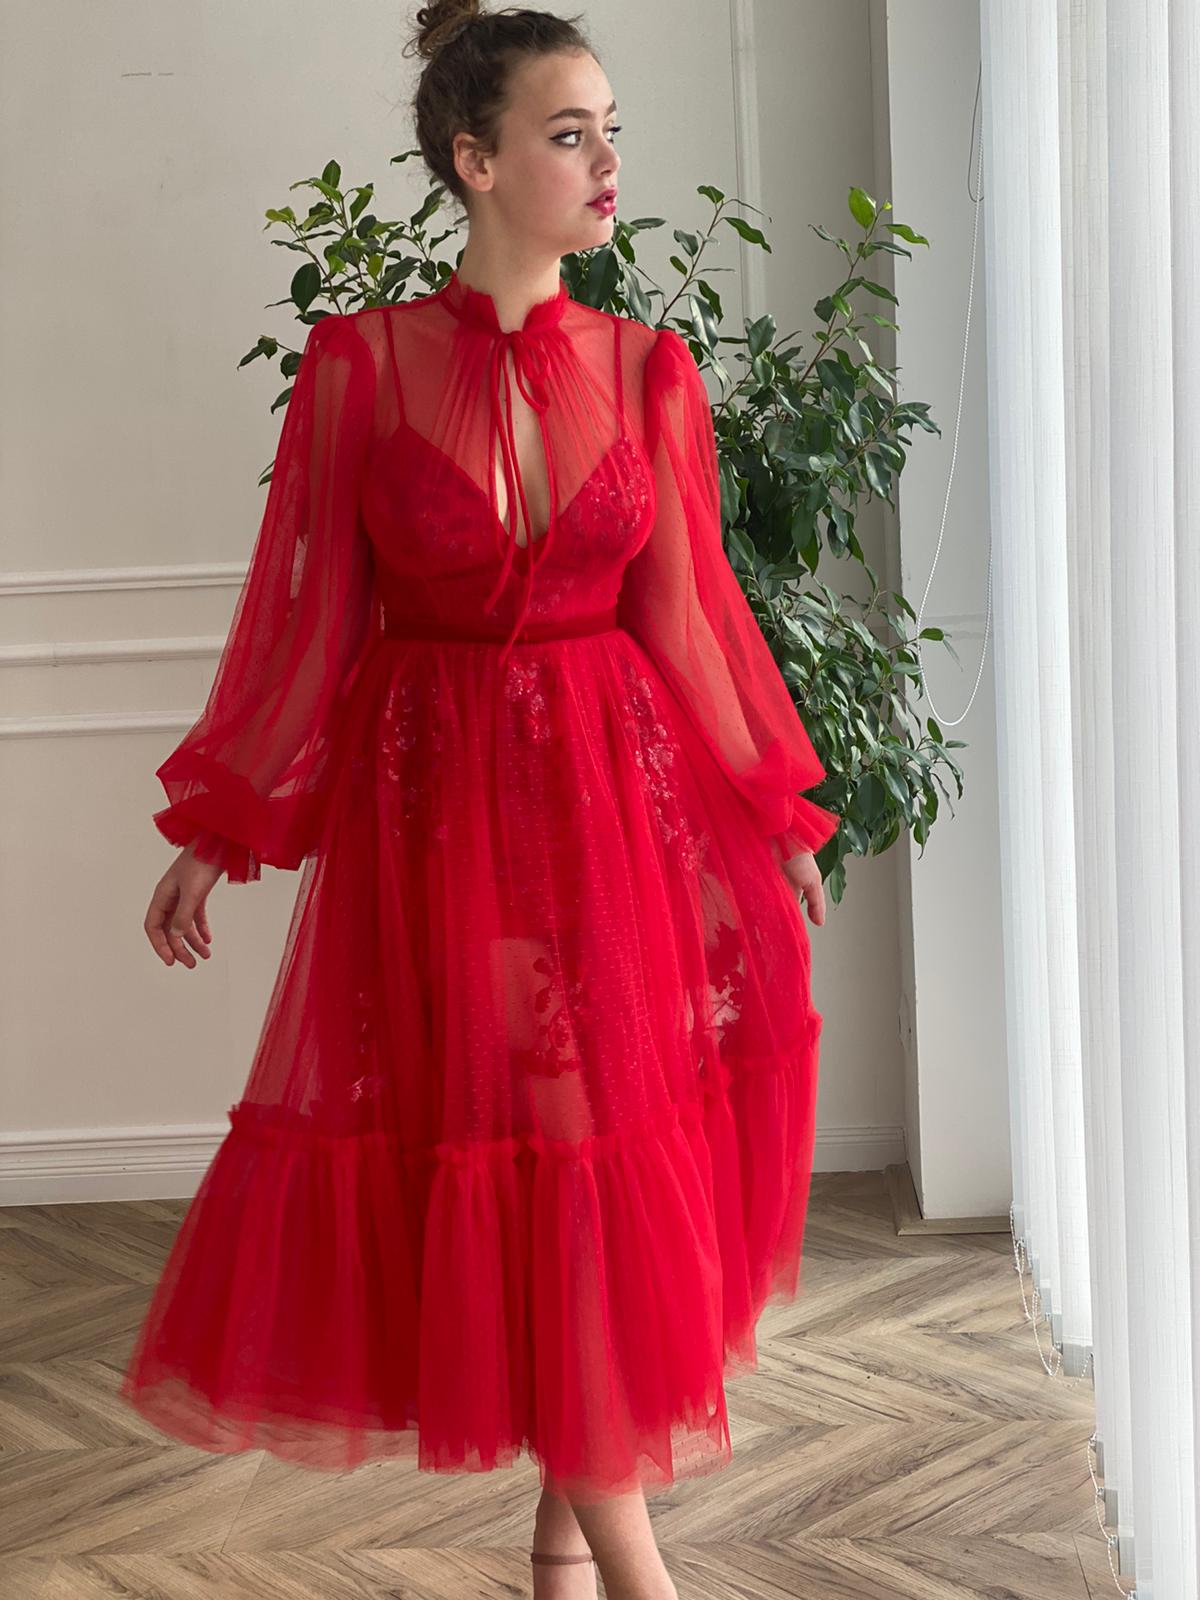 Red midi dress with long sleeves and embroidery